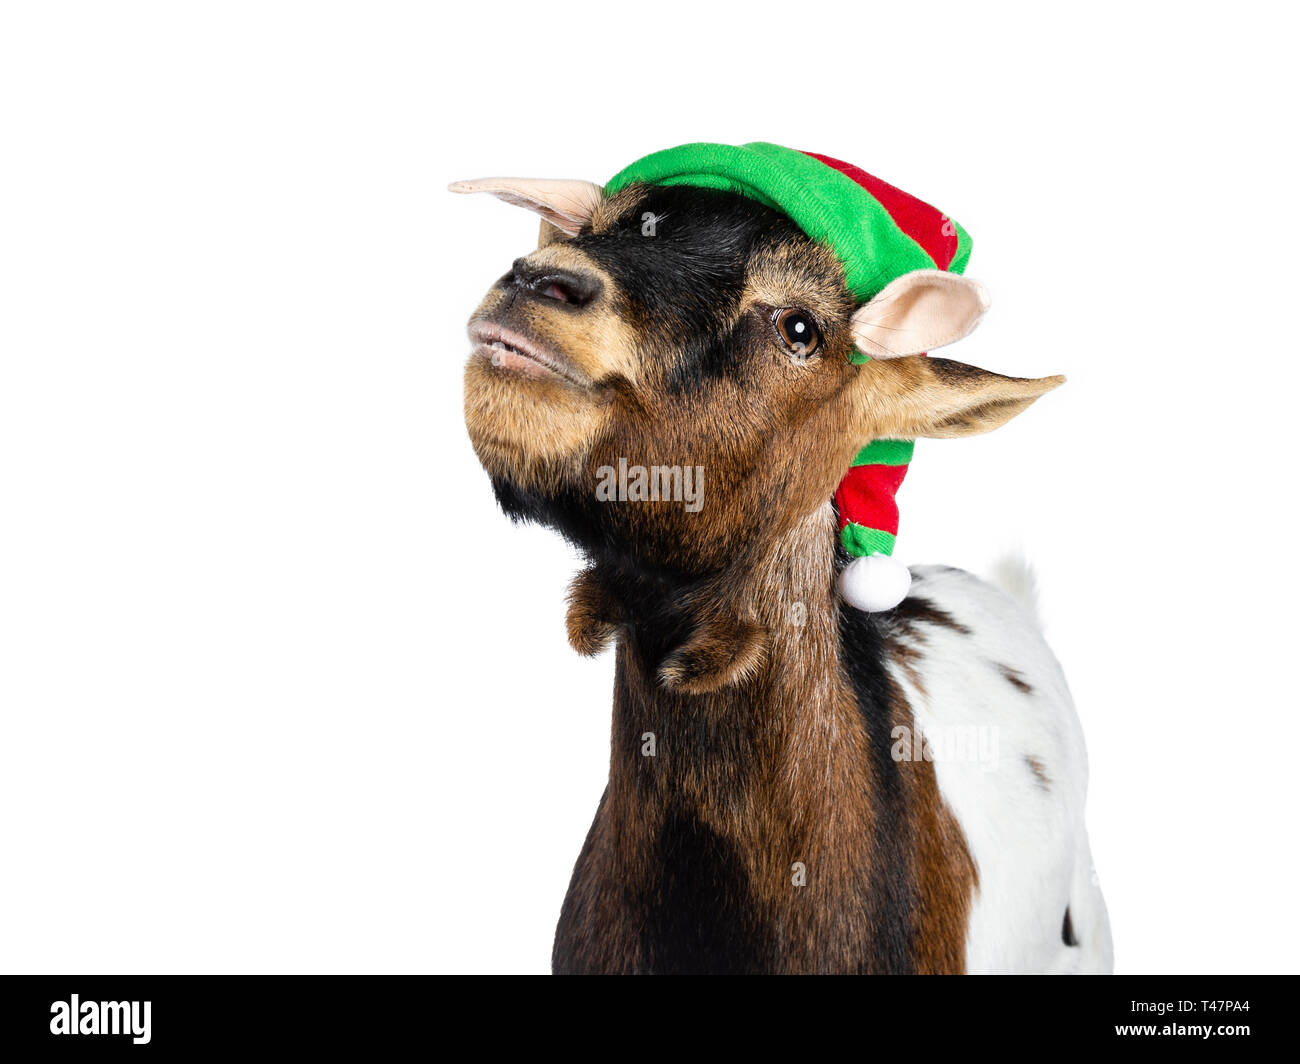 Head shot of funny brown pygmy goat wearing a red and green elf hat. Looking straight at camera with head tilted upwards. Isolated on white background Stock Photo